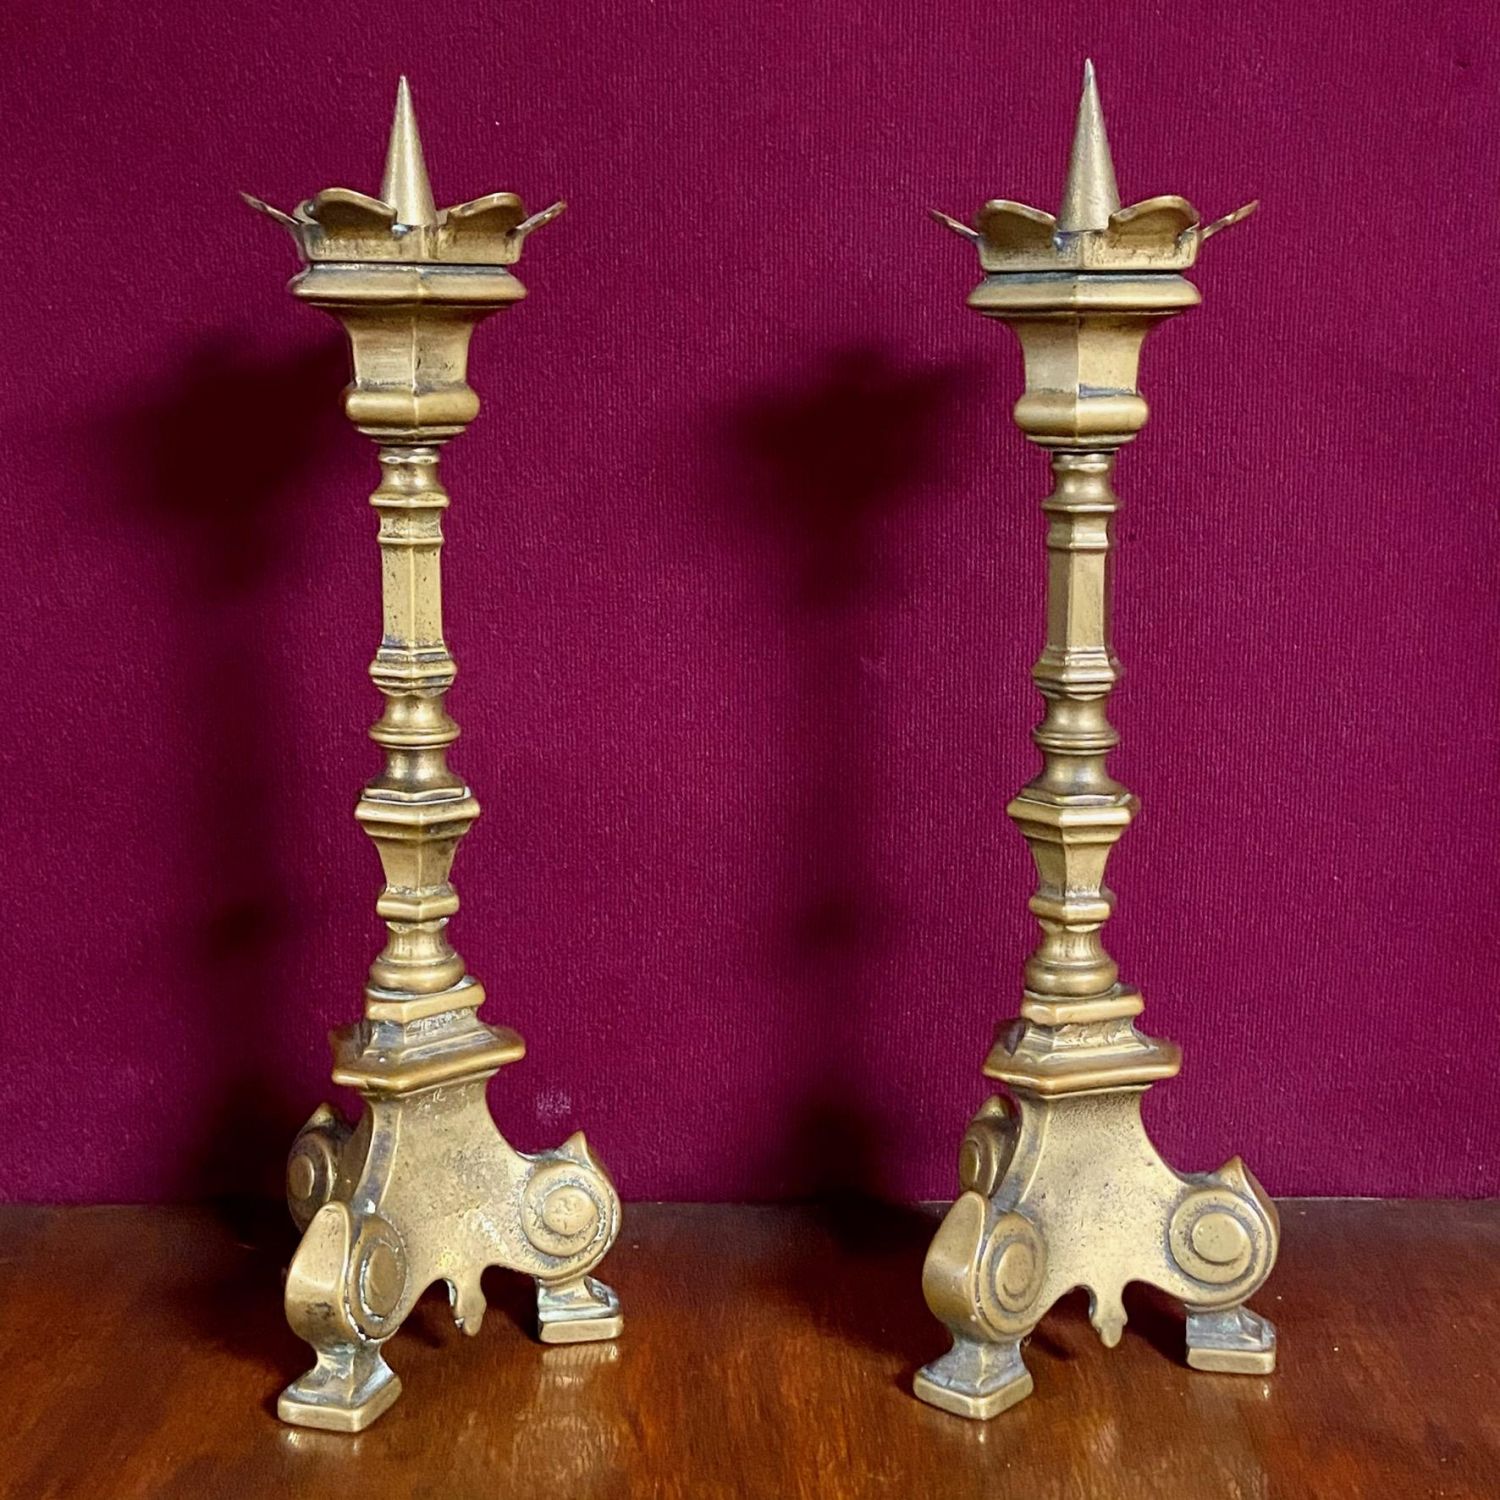 Antique Brass Pricket Candlesticks Candle Holders 16 